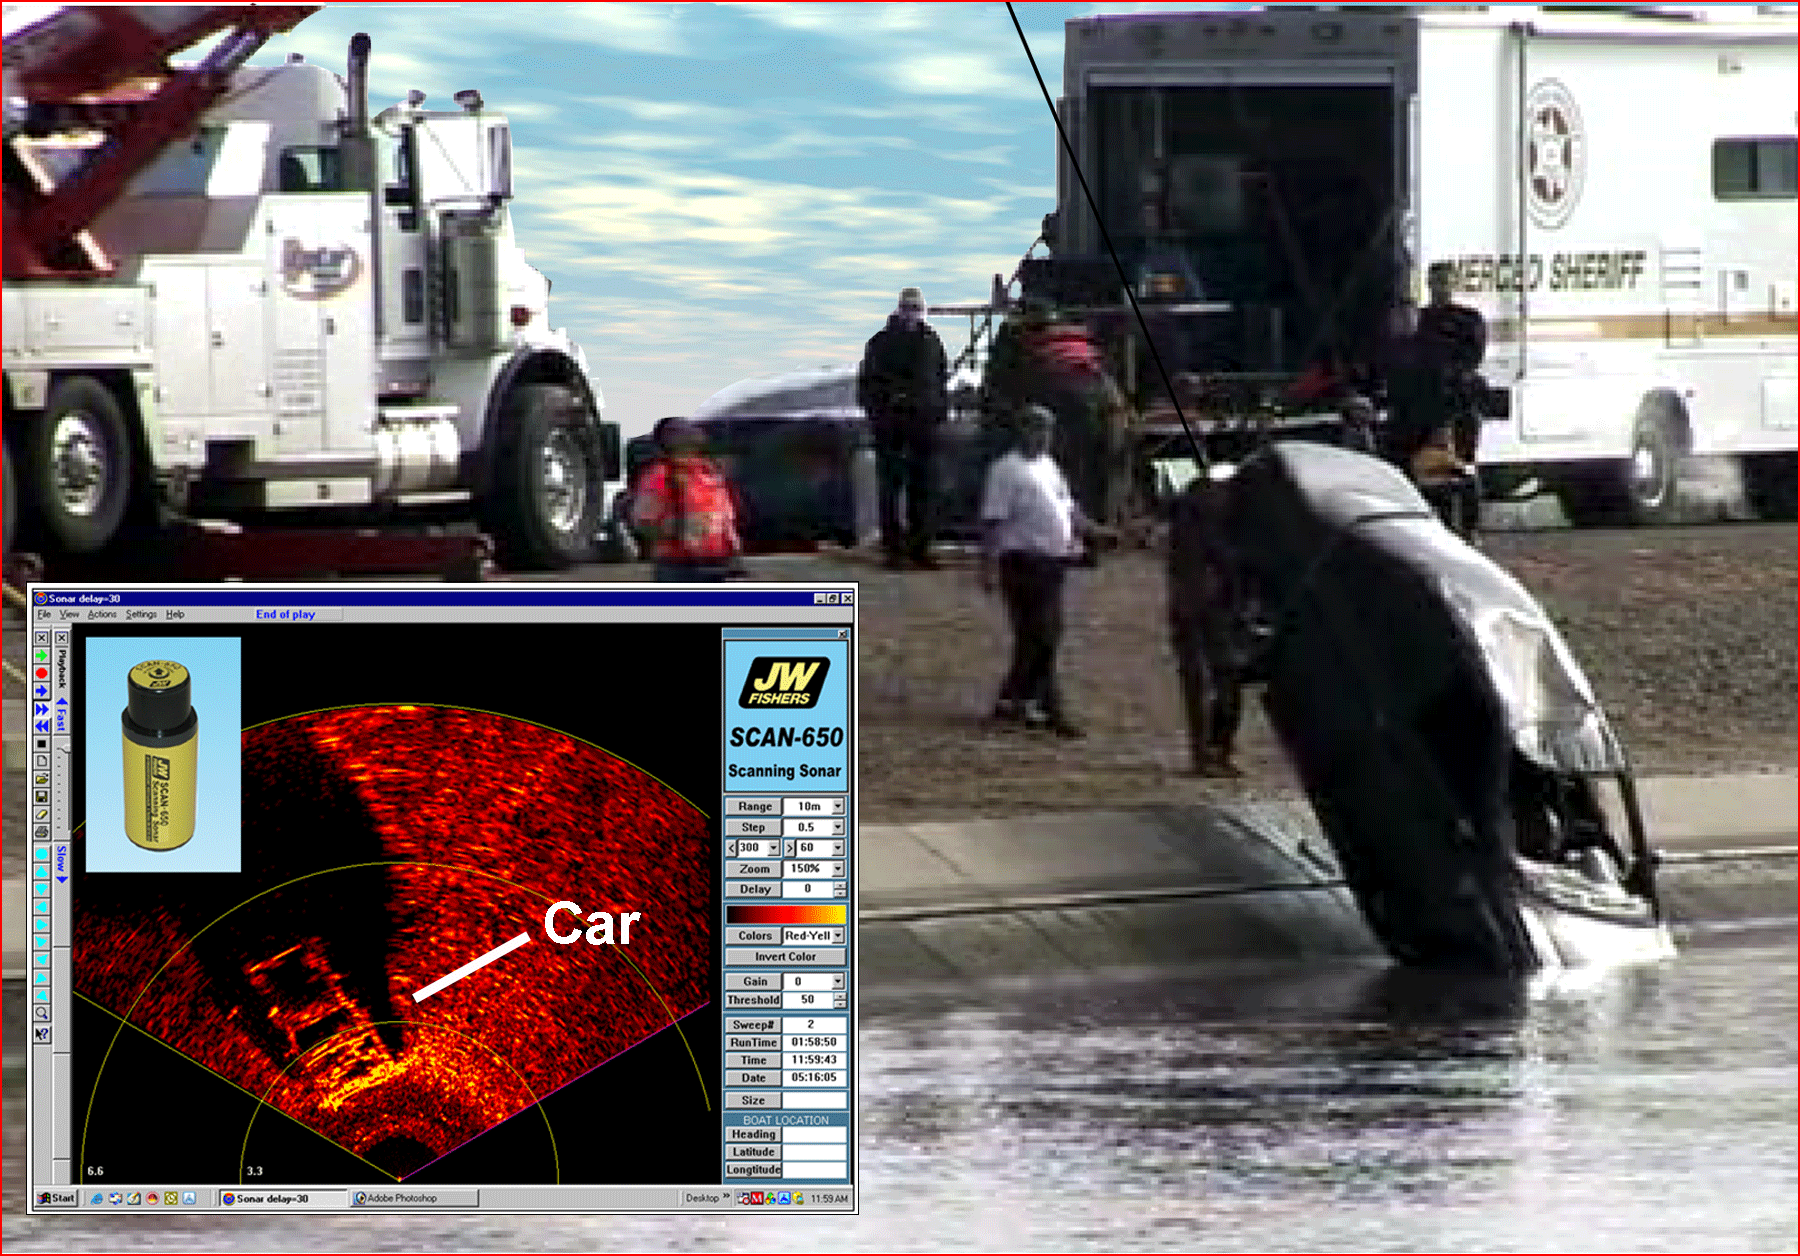 Main photo: Car being recovered from California drainage canal; Inset photo: Scanning sonar image of car on the bottom